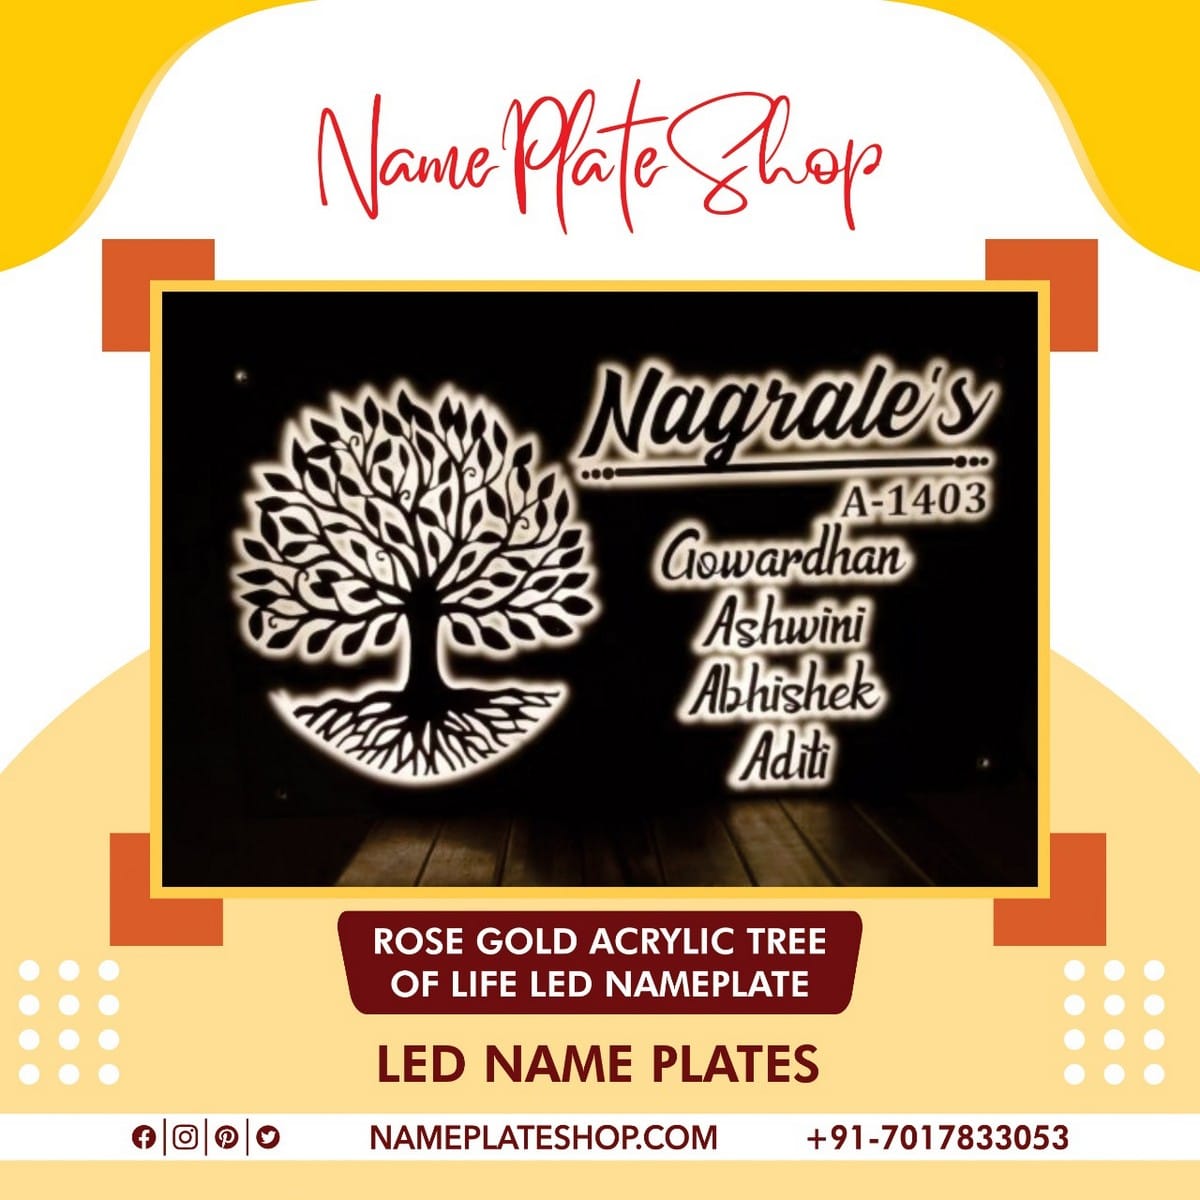 Dont Stress Out Visit Nameplateshop For Multiple Options In Led Name Plates